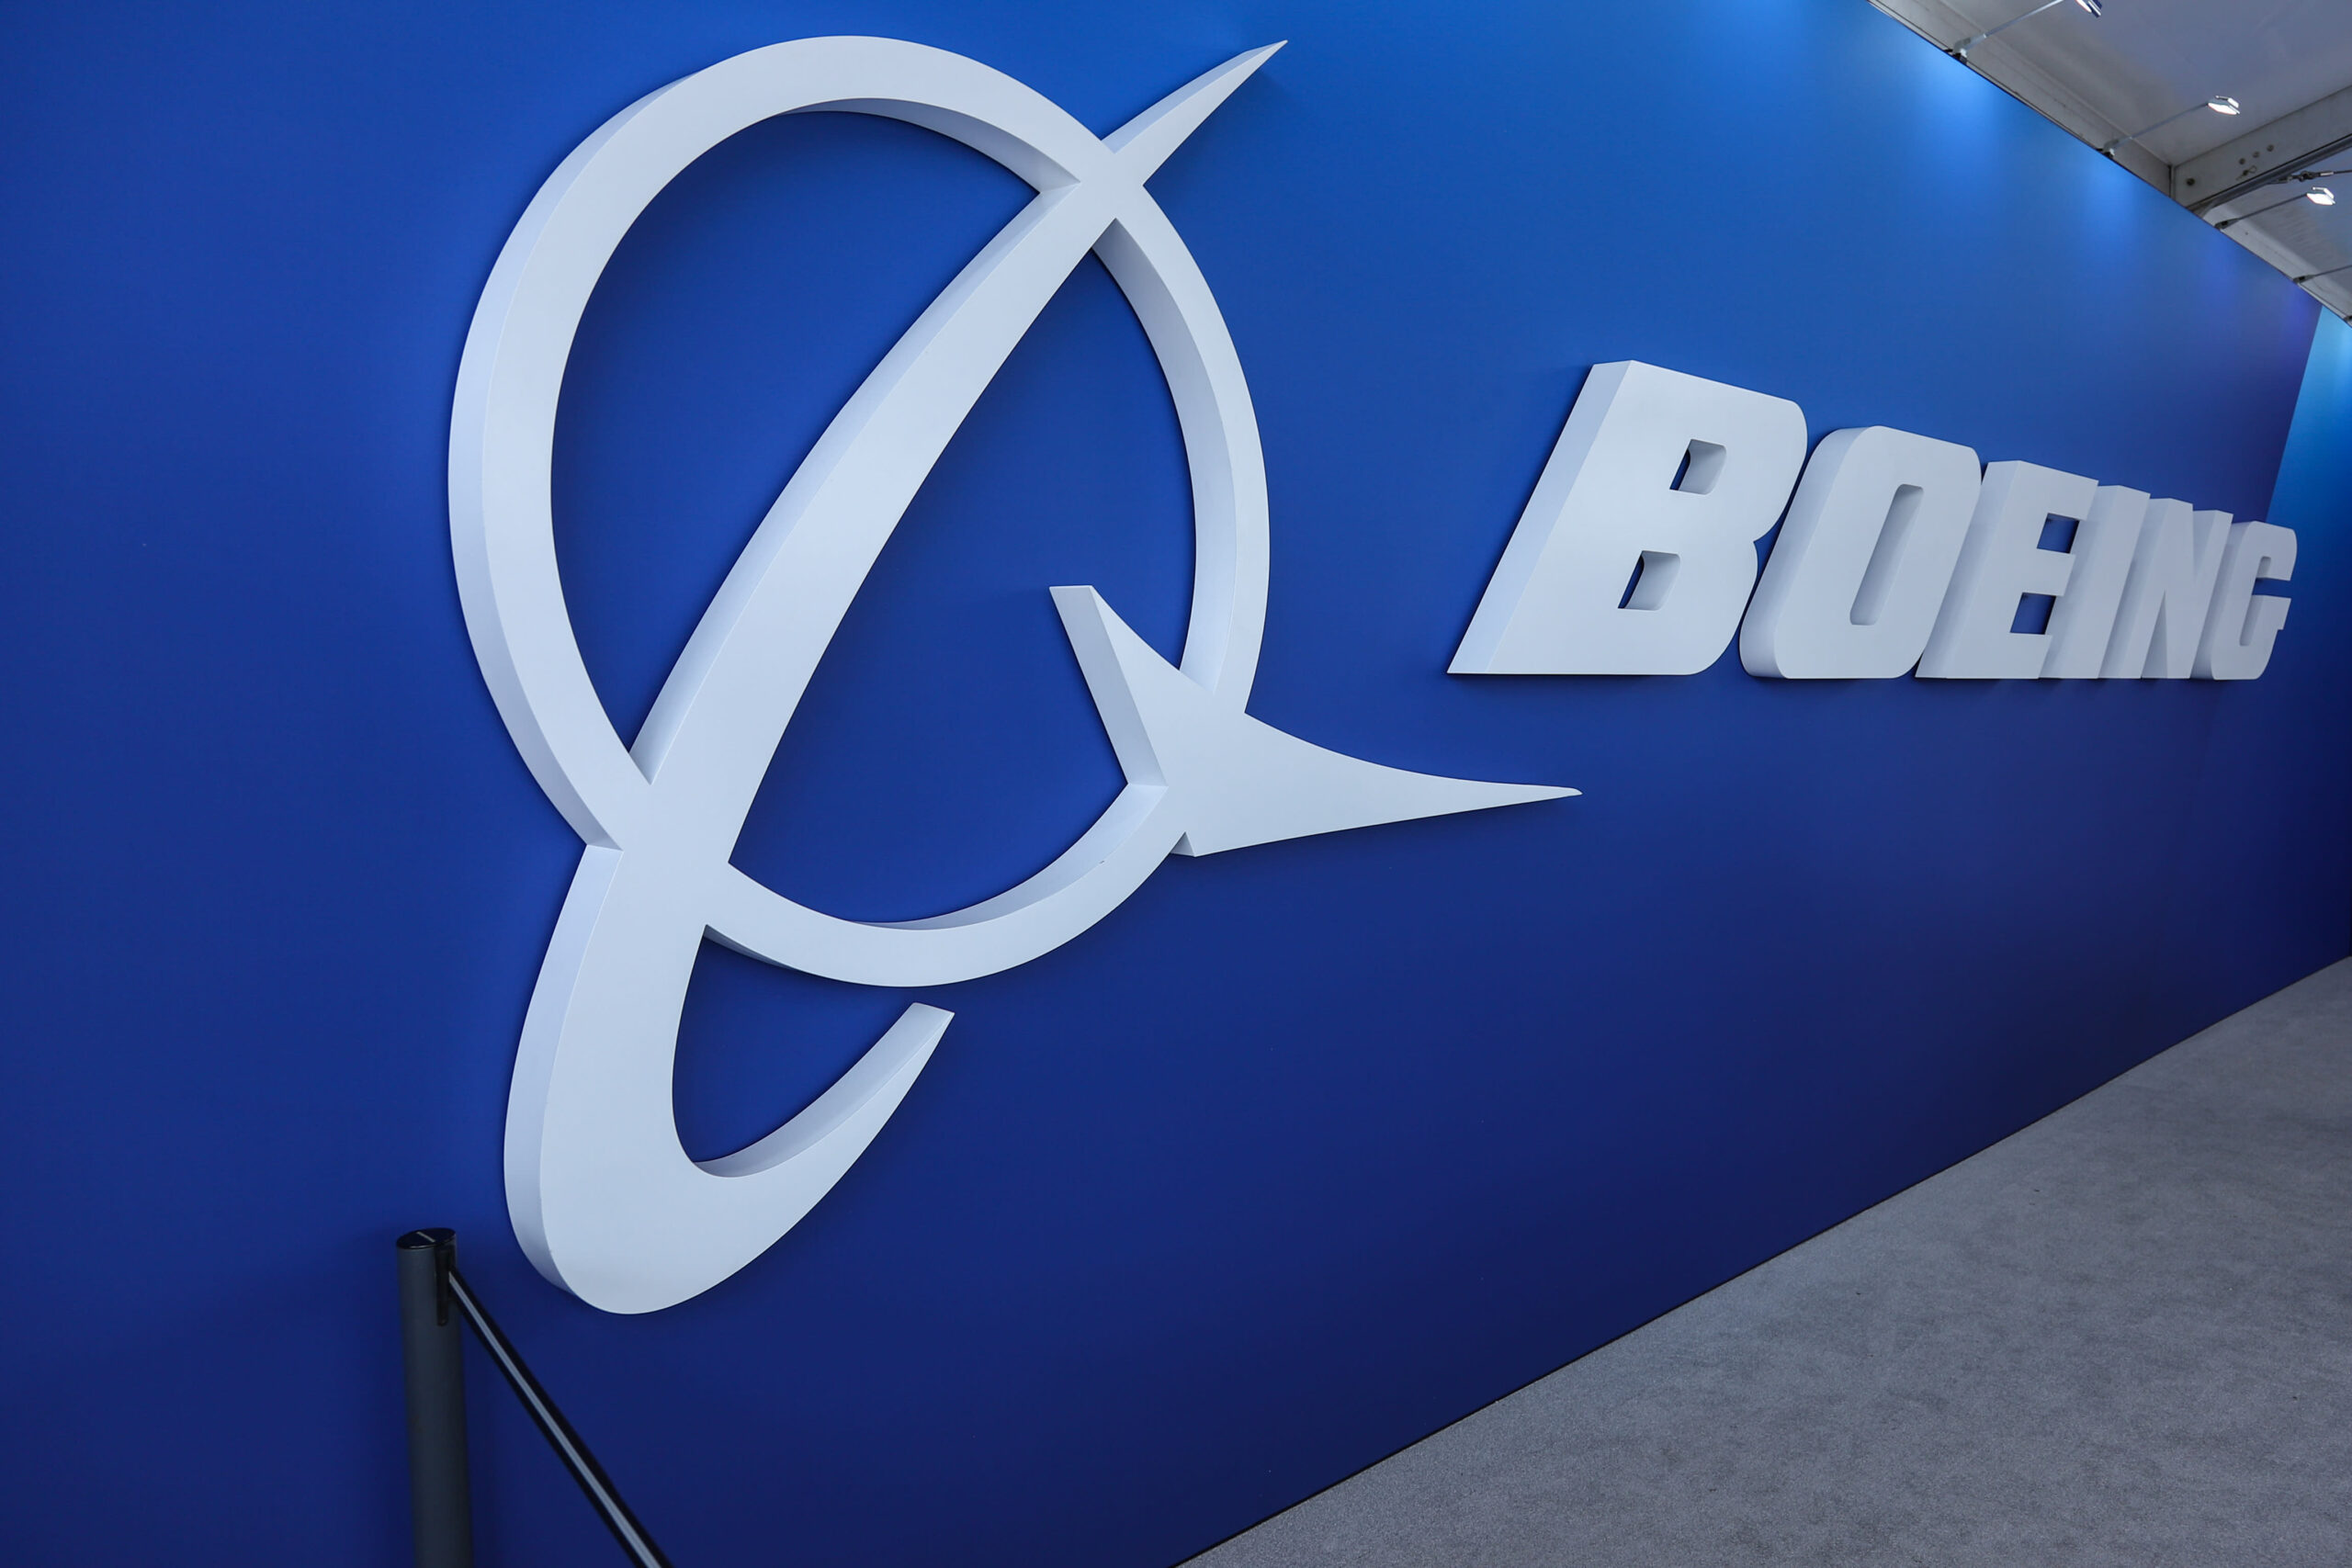 Jim Cramer sees upside in Boeing after inventory took hit on 737 Max subject